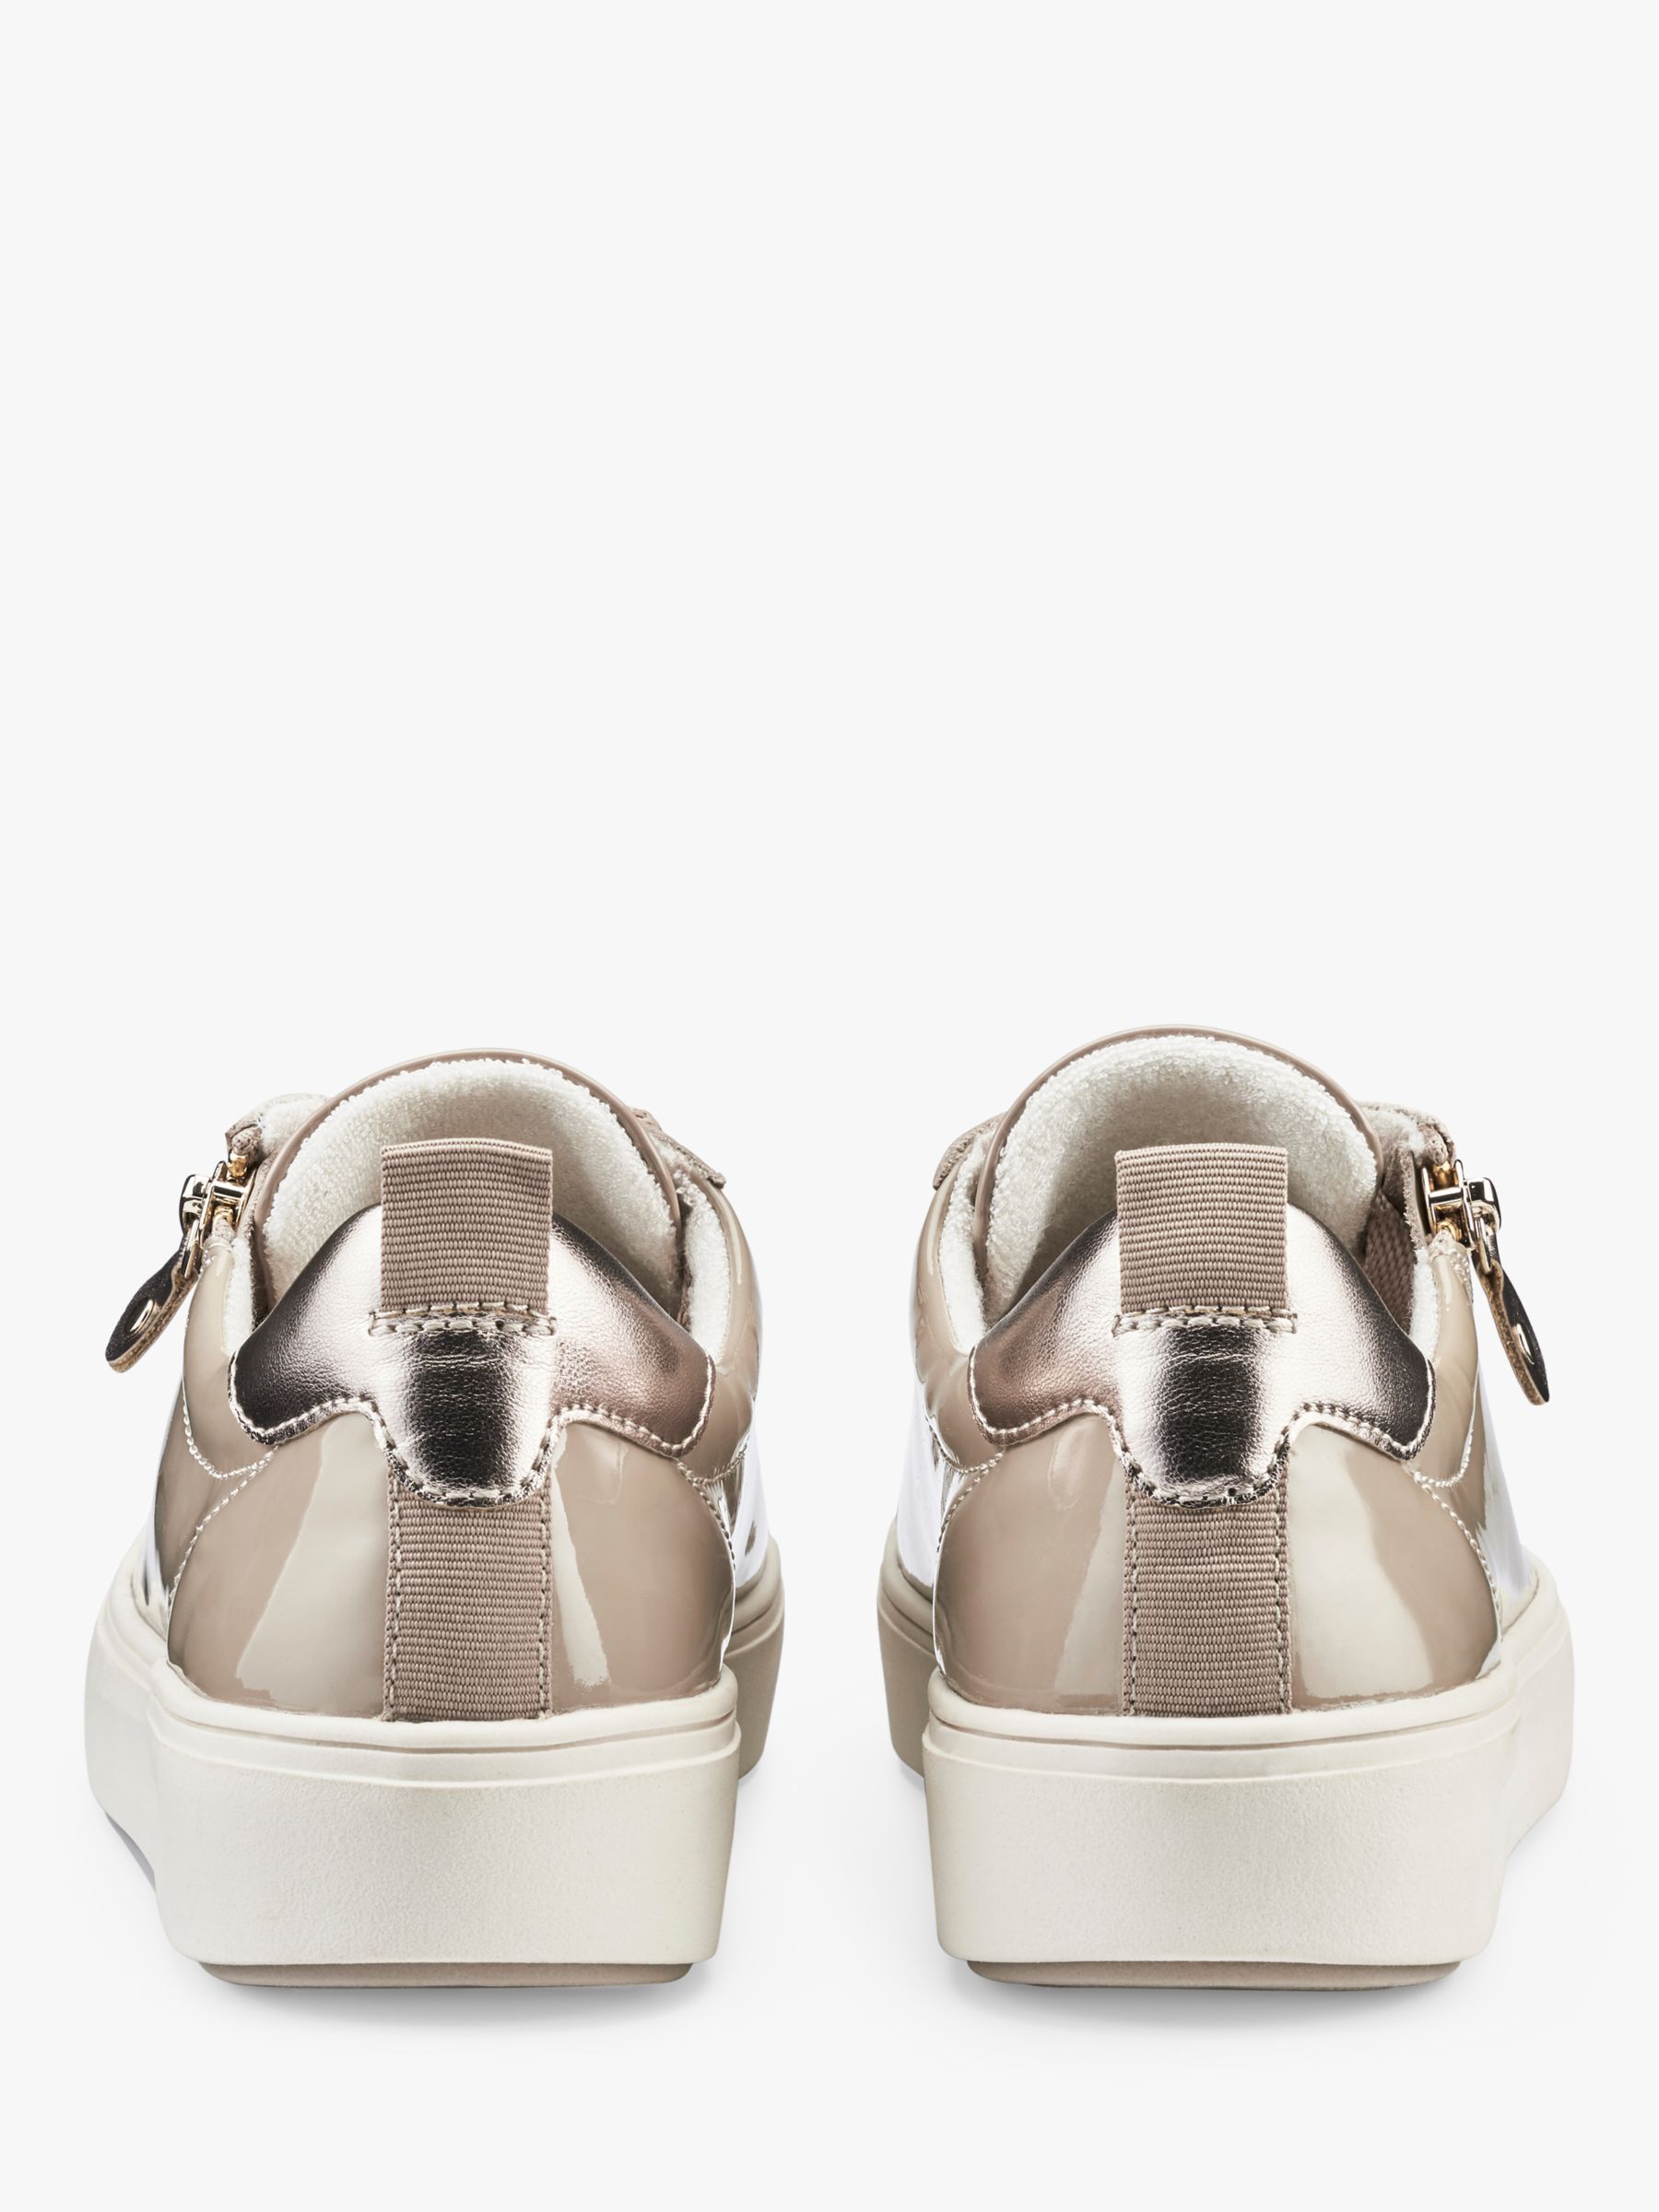 Buy Hotter Cupid Patent Leather Zip and Go Trainers, Beige Online at johnlewis.com